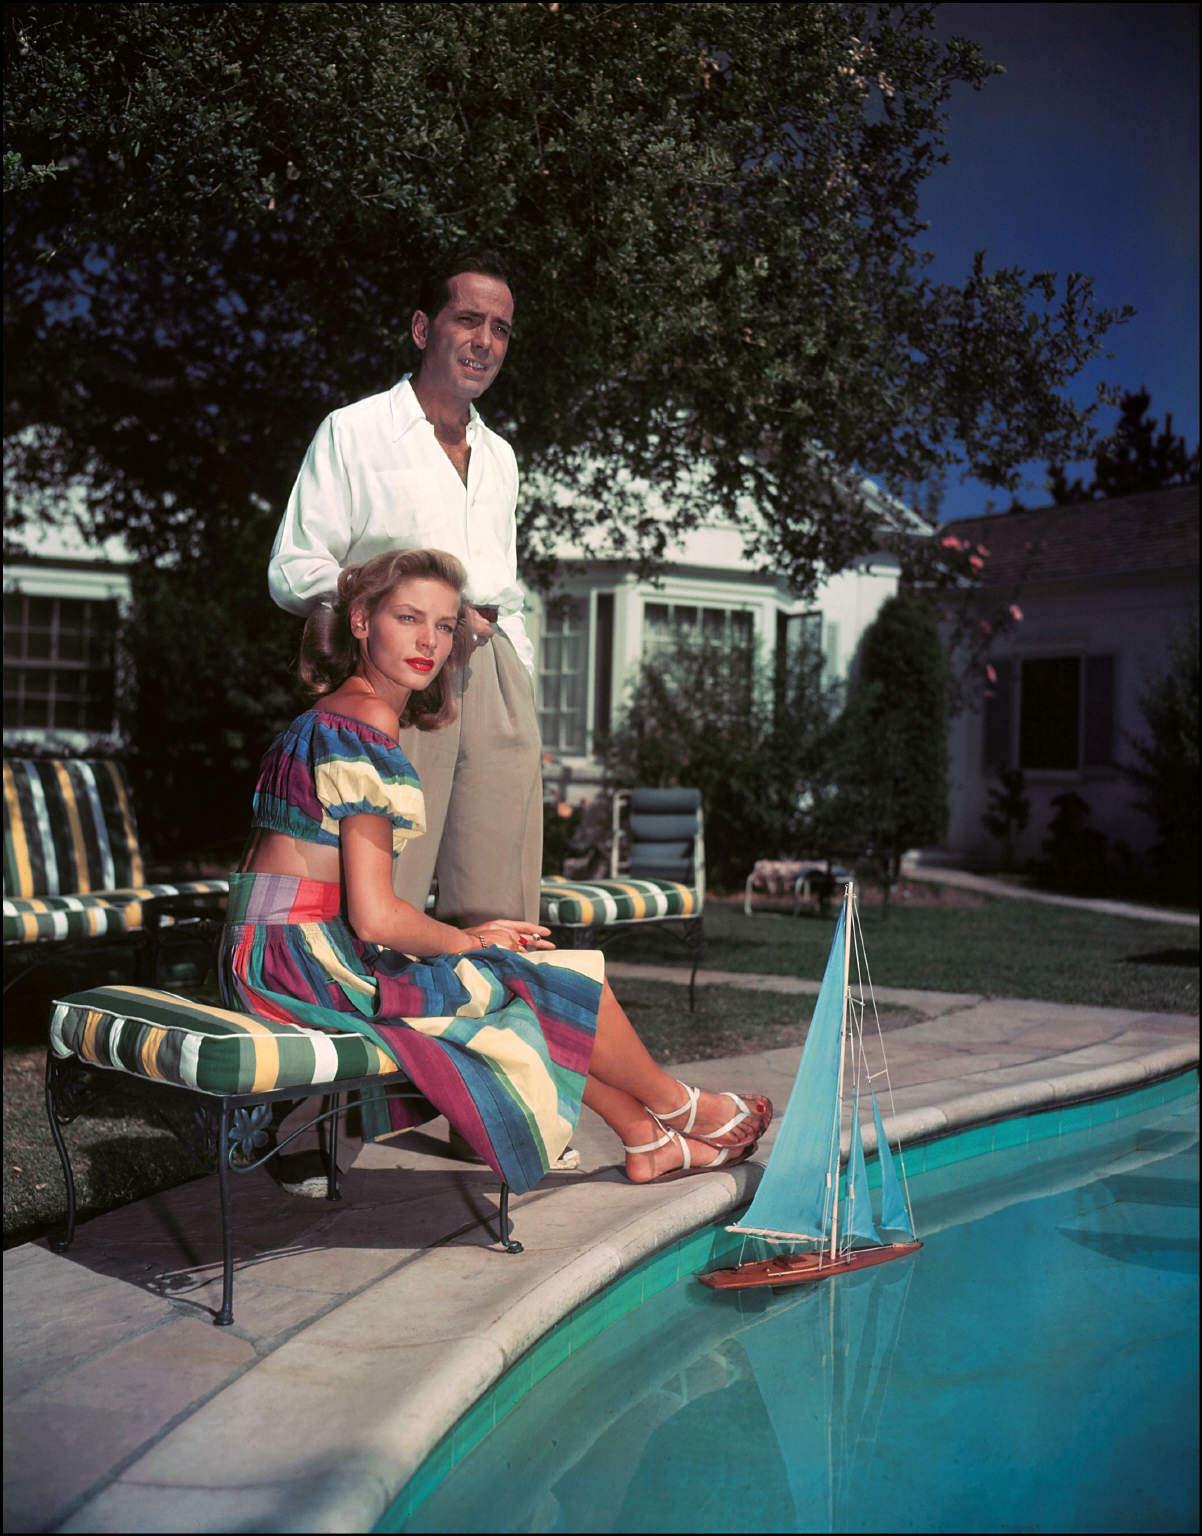 49 Hot Pictures Of Lauren Bacall Which Are Going To Make You Want Her Badly | Best Of Comic Books